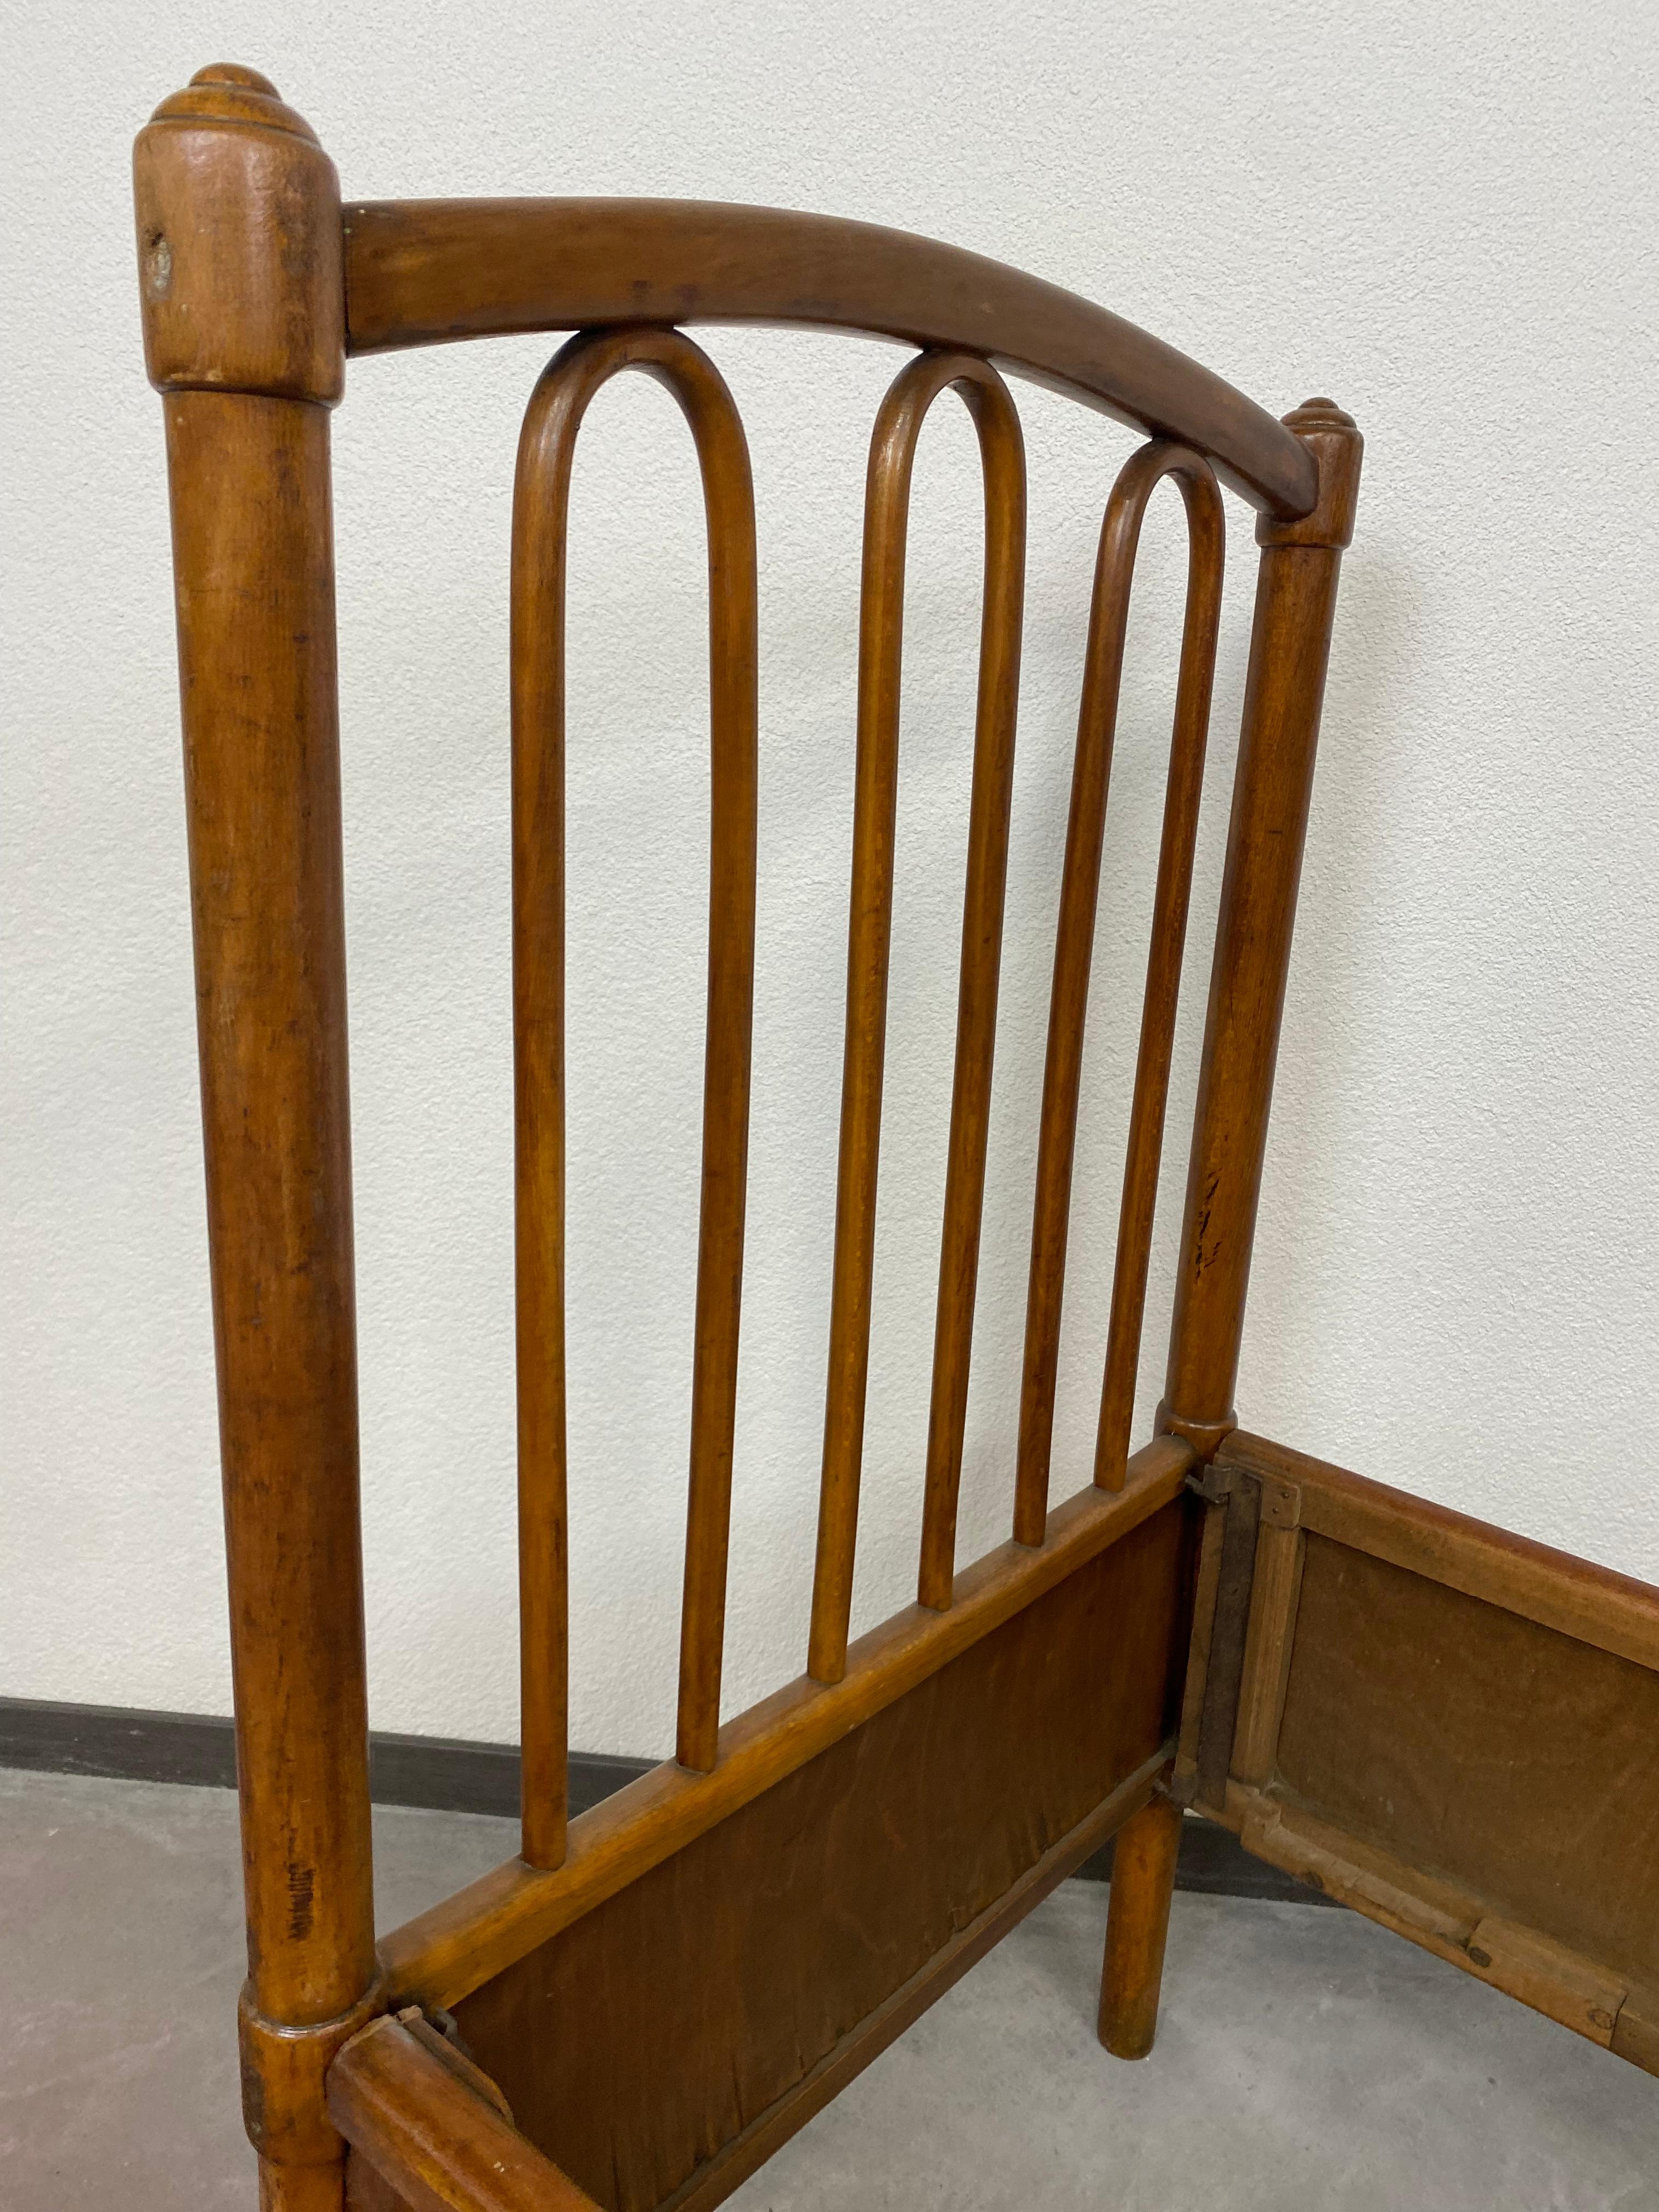 Thonet bed no.5 for a child In Fair Condition For Sale In Banská Štiavnica, SK